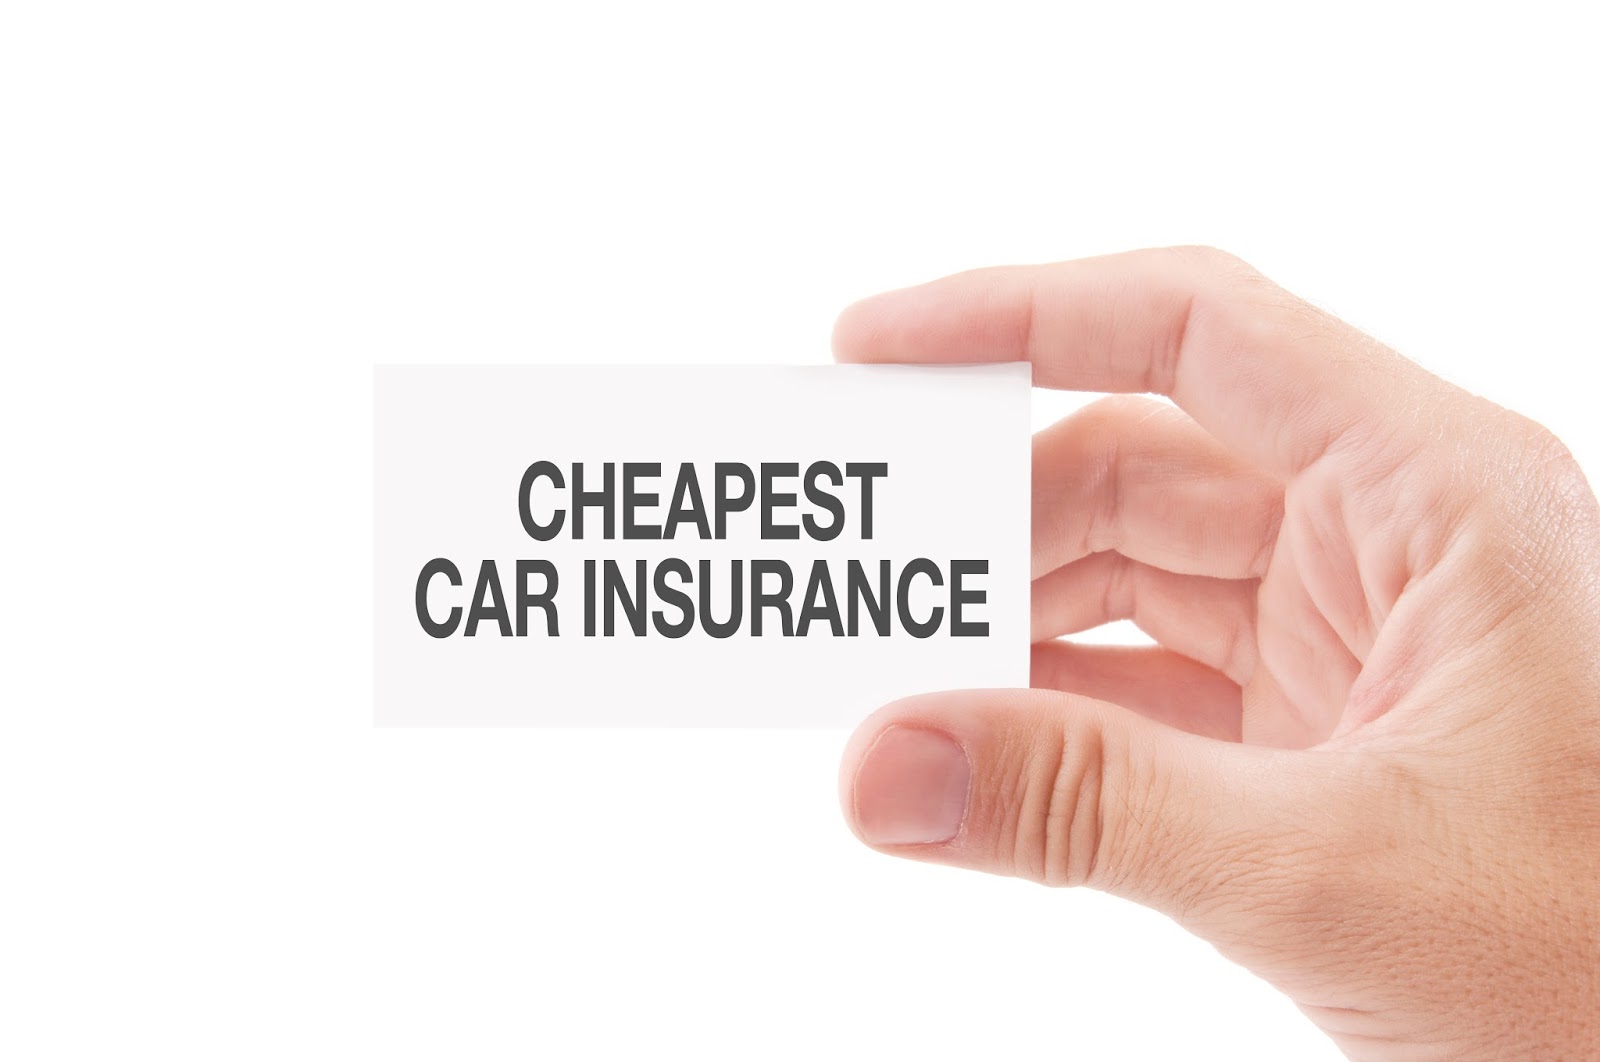 Law And Insurance: Cheap Car Insurance Company - A Little Help To Make